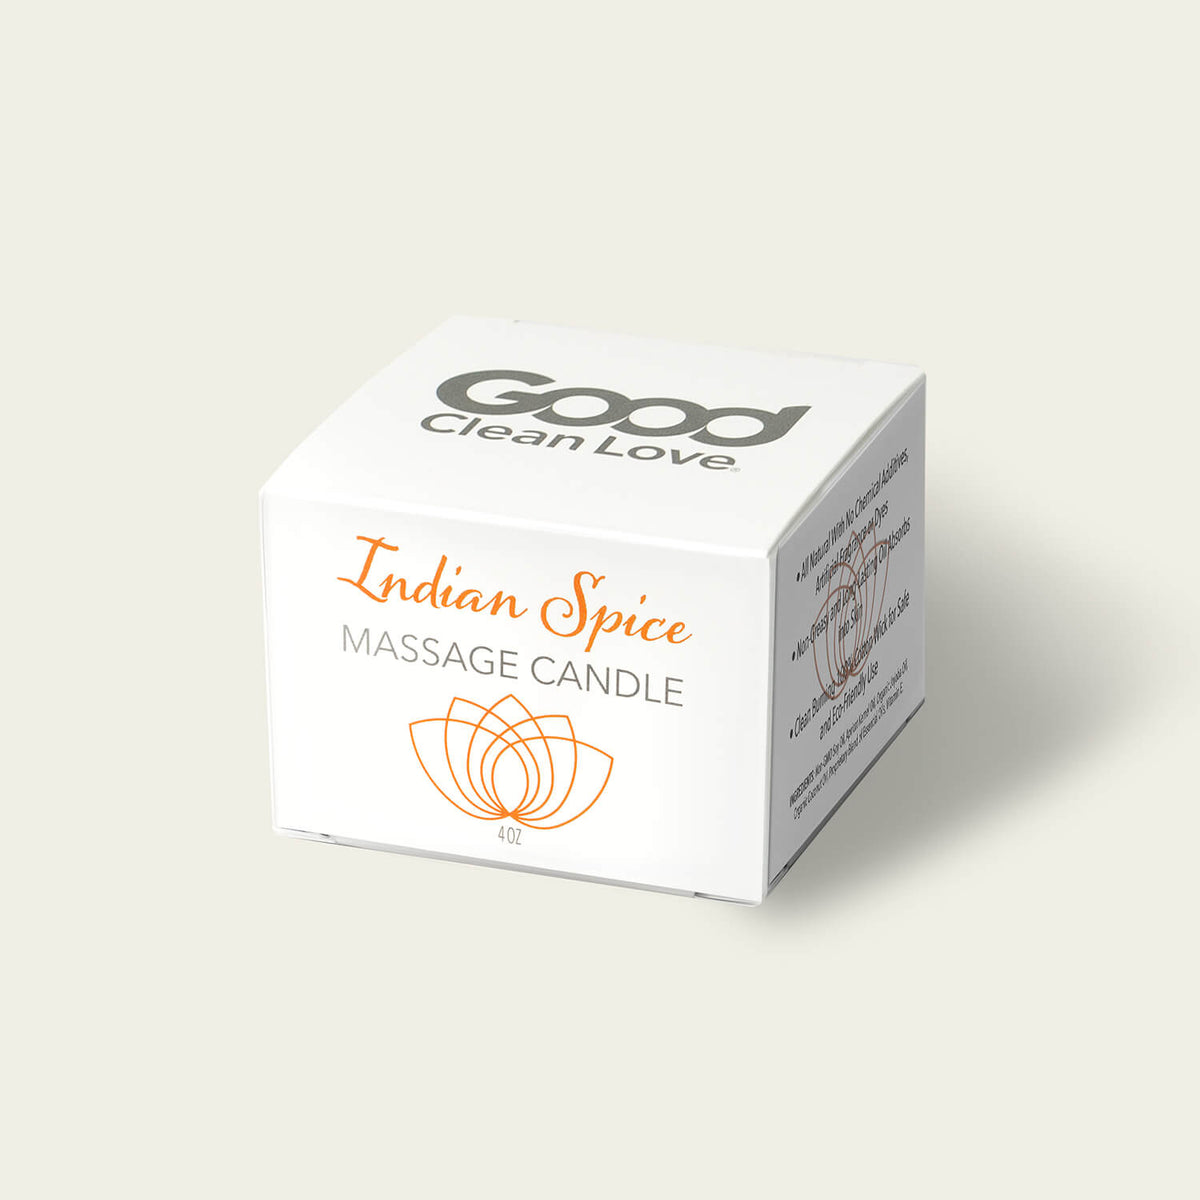 Indian Spice Massage Candle 4 oz